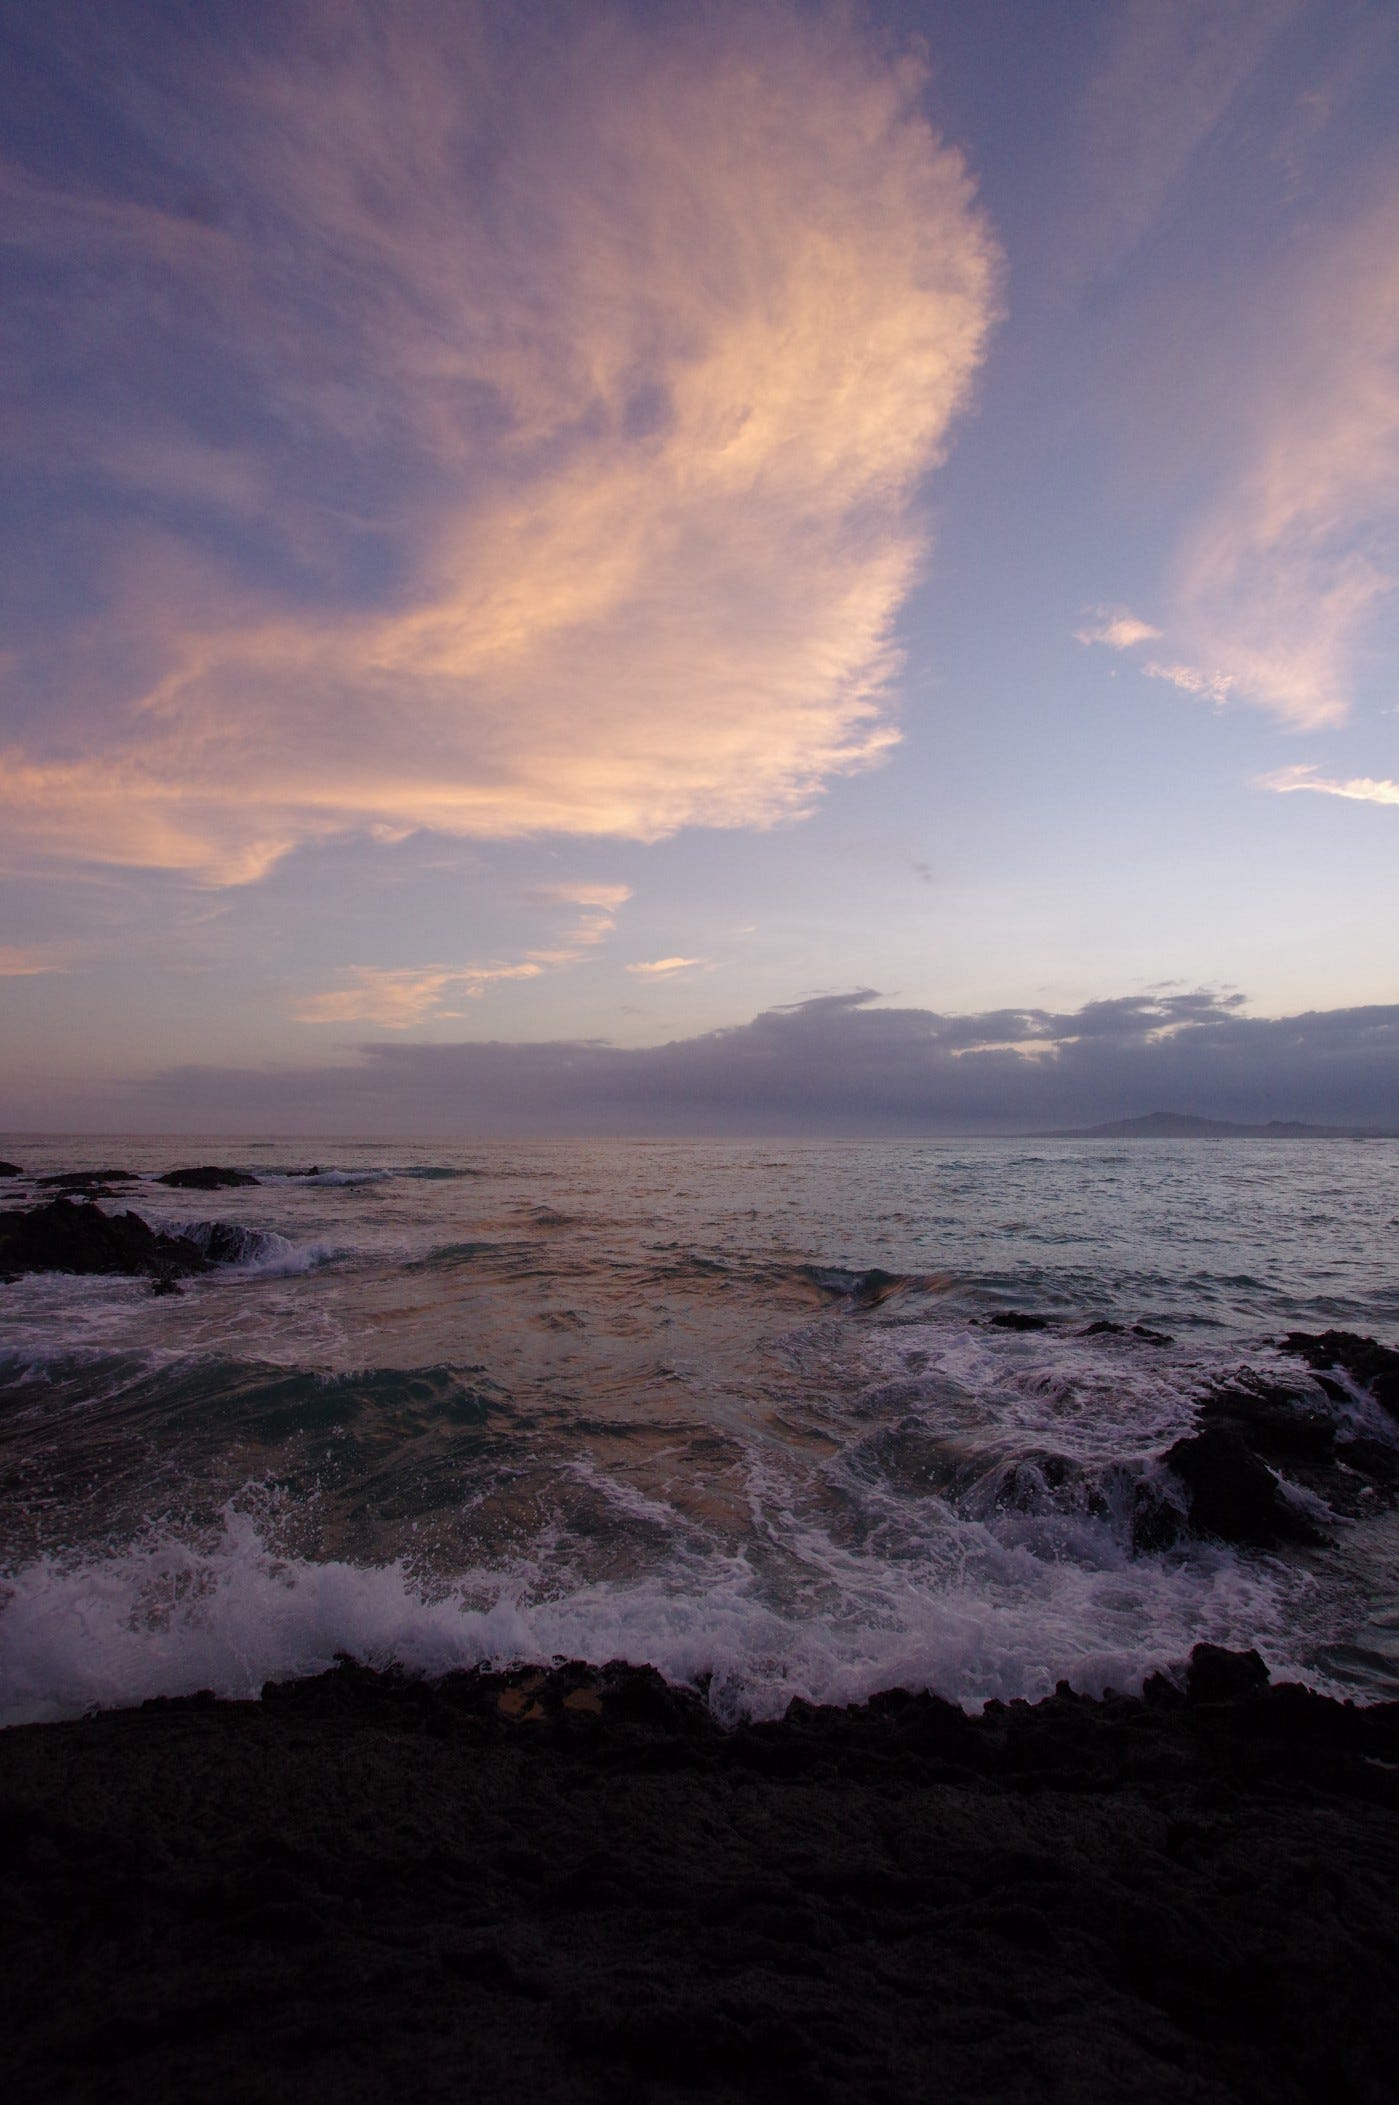 Sky over the Pacific on the Galápagos. Photo by Heather, 4/1/16